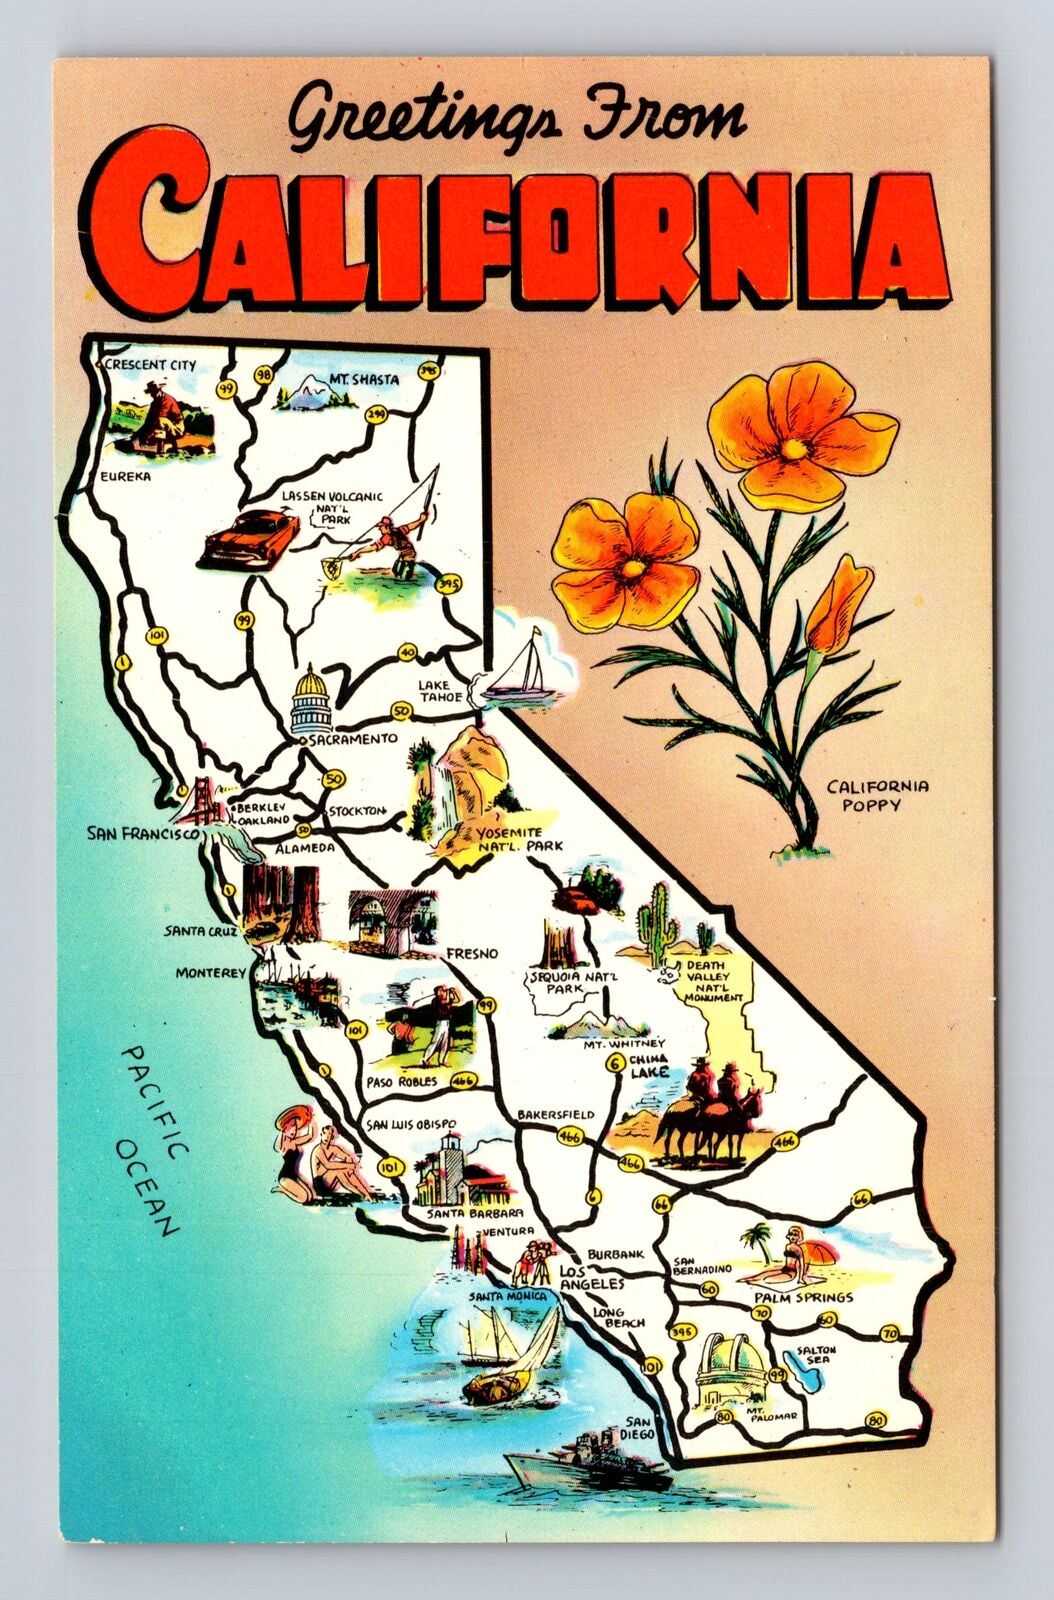 Greetings From California, State Map, State Flower, Vintage Souvenir Postcard